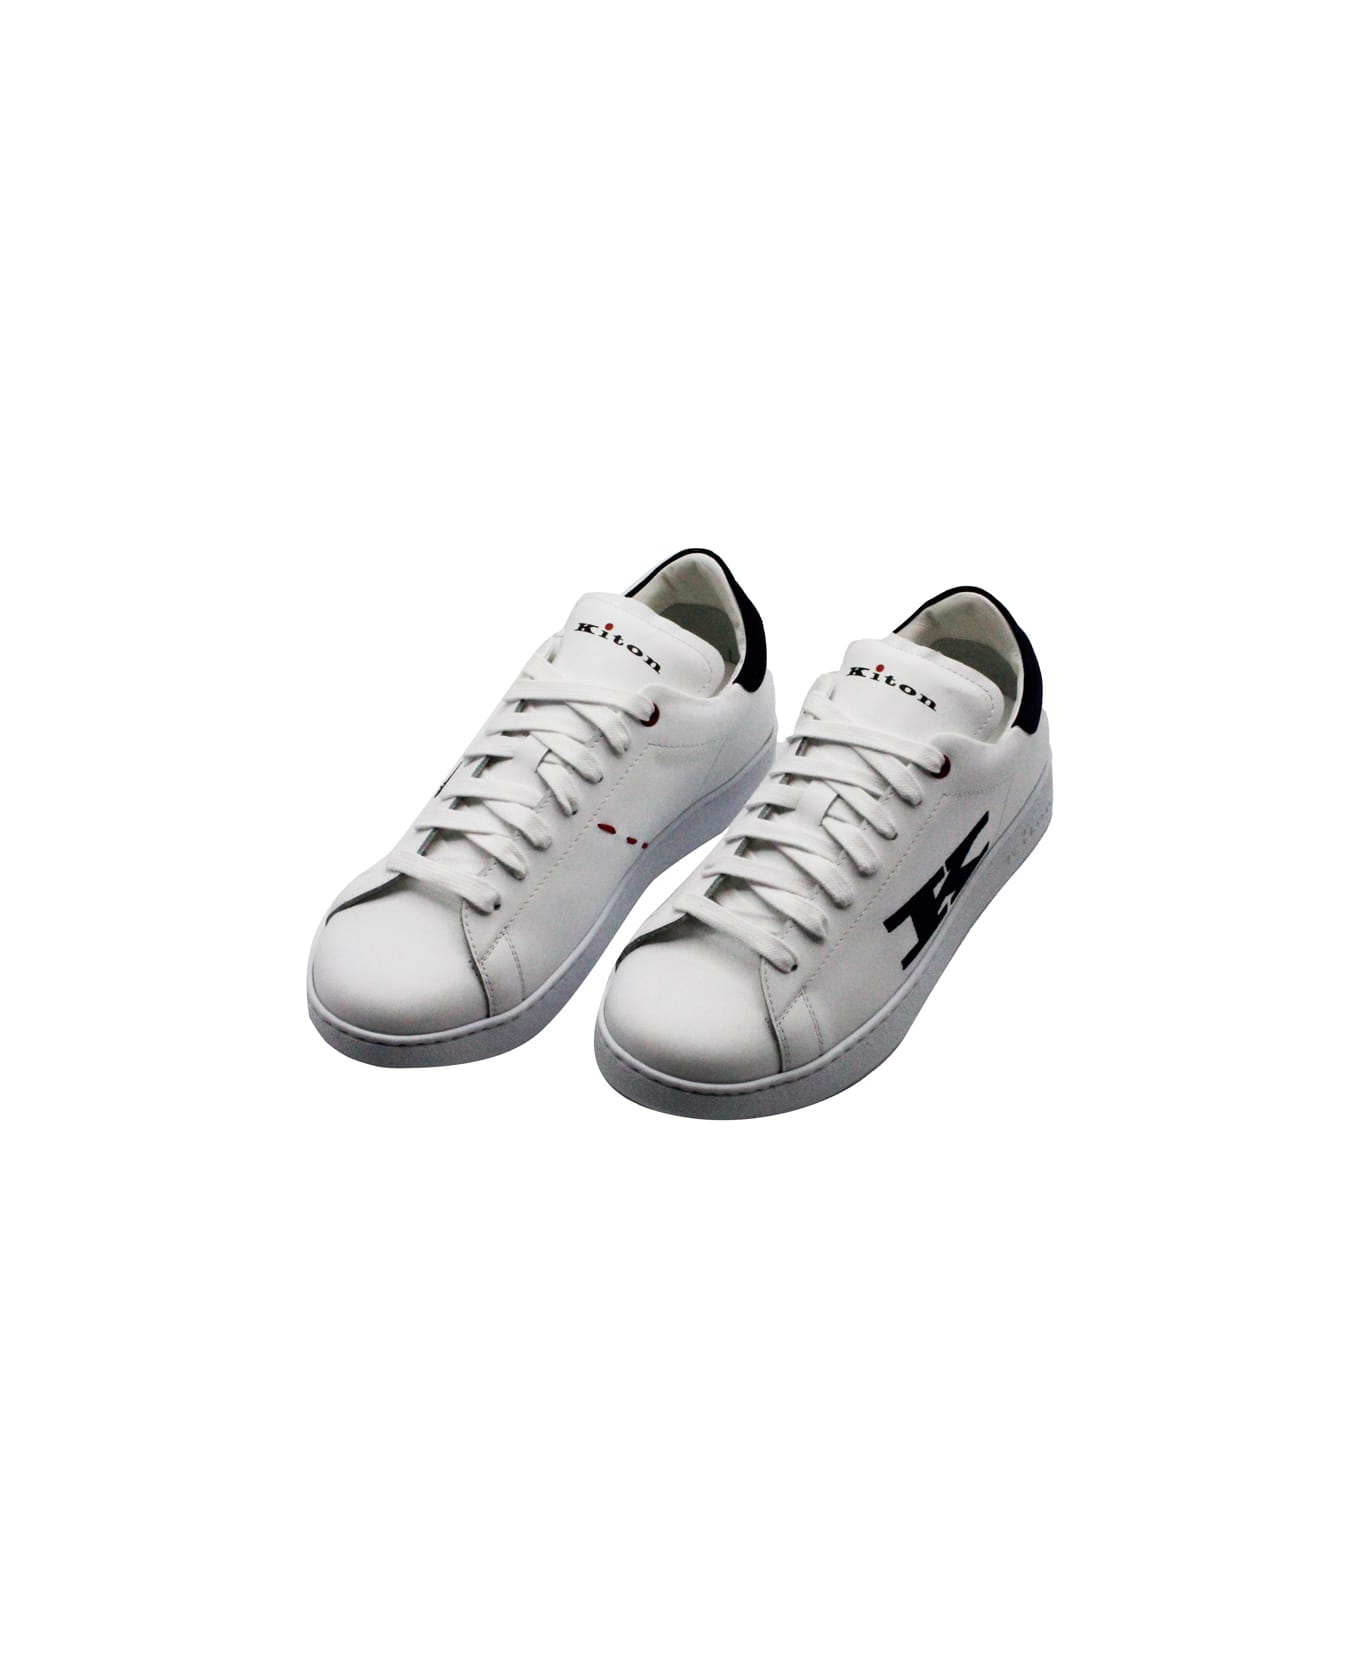 Kiton Sneackers Shoe In Leather With Suede Trims And With Contrasting Stitching. - White スニーカー